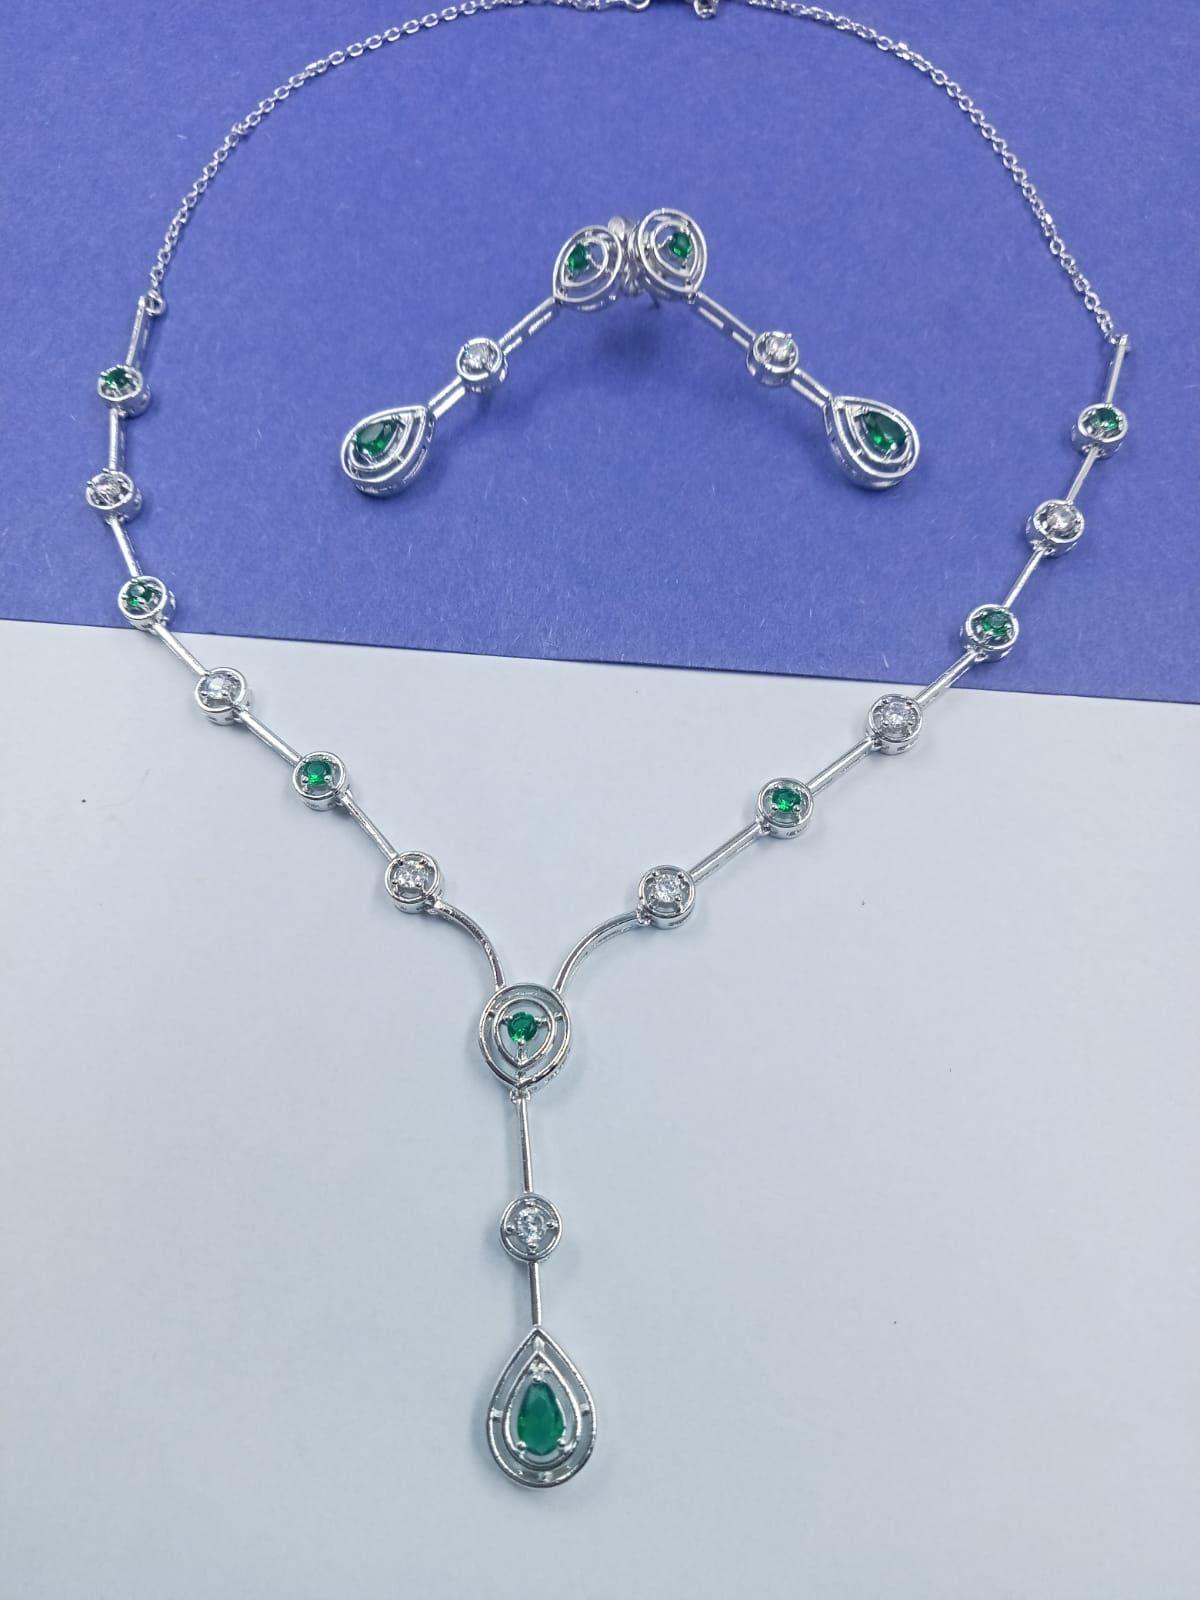 New and Latest Design of Desi Rajasthani Silver Necklace Jewellery 